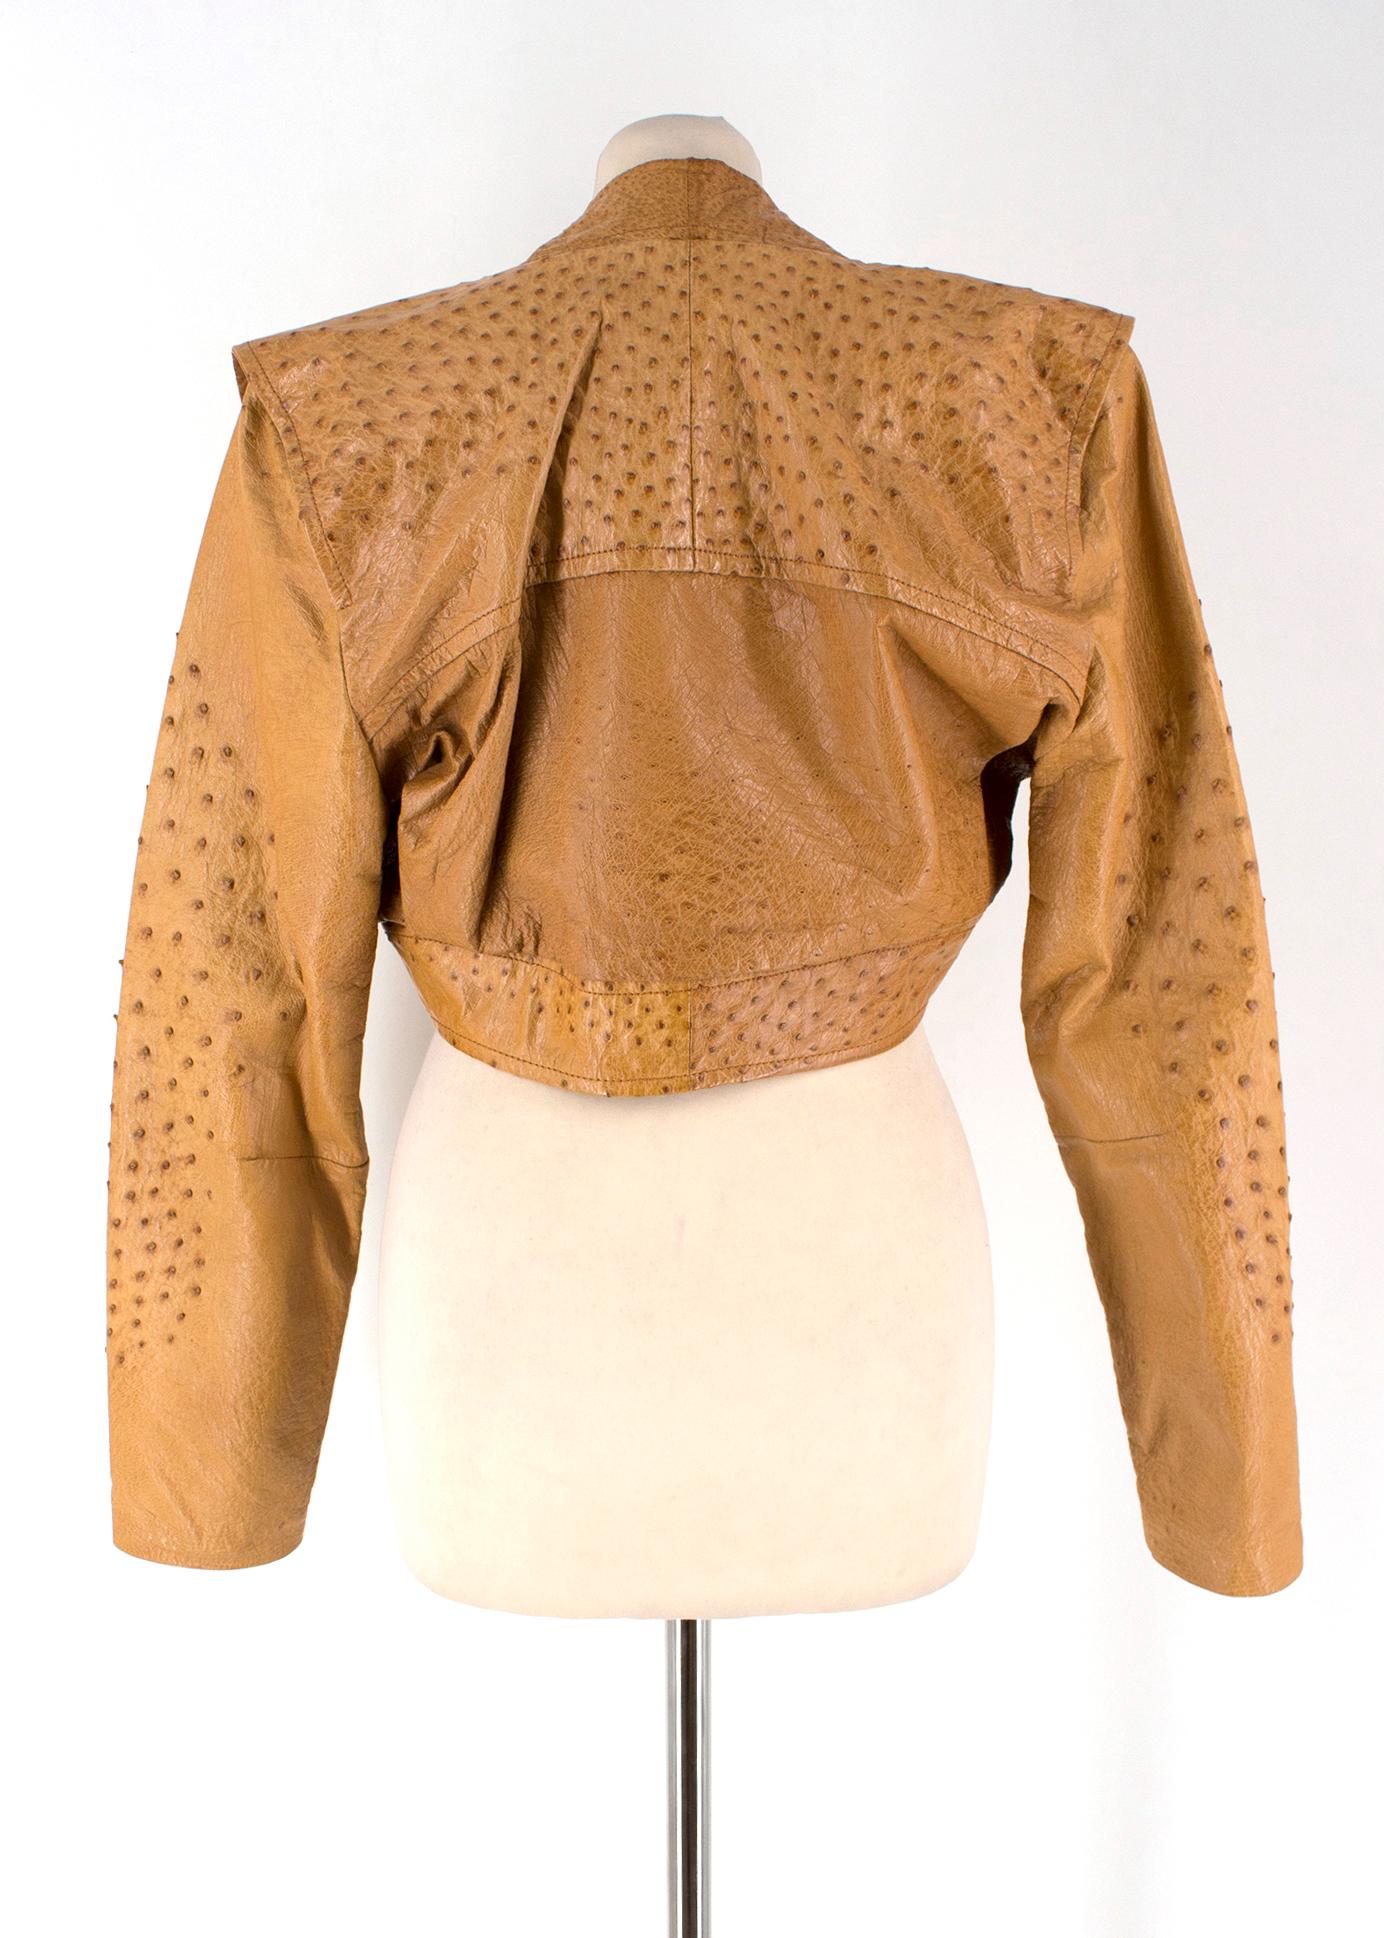 Jean Claude Jitois Tan Ostrich Jacket
Please see matching skirt 
 
- Cropped ostrich leather jacket
- Two illusion front pockets
- Rounded hemline

-There is a matching skirt available

Please note, these items are pre-owned and may show signs of